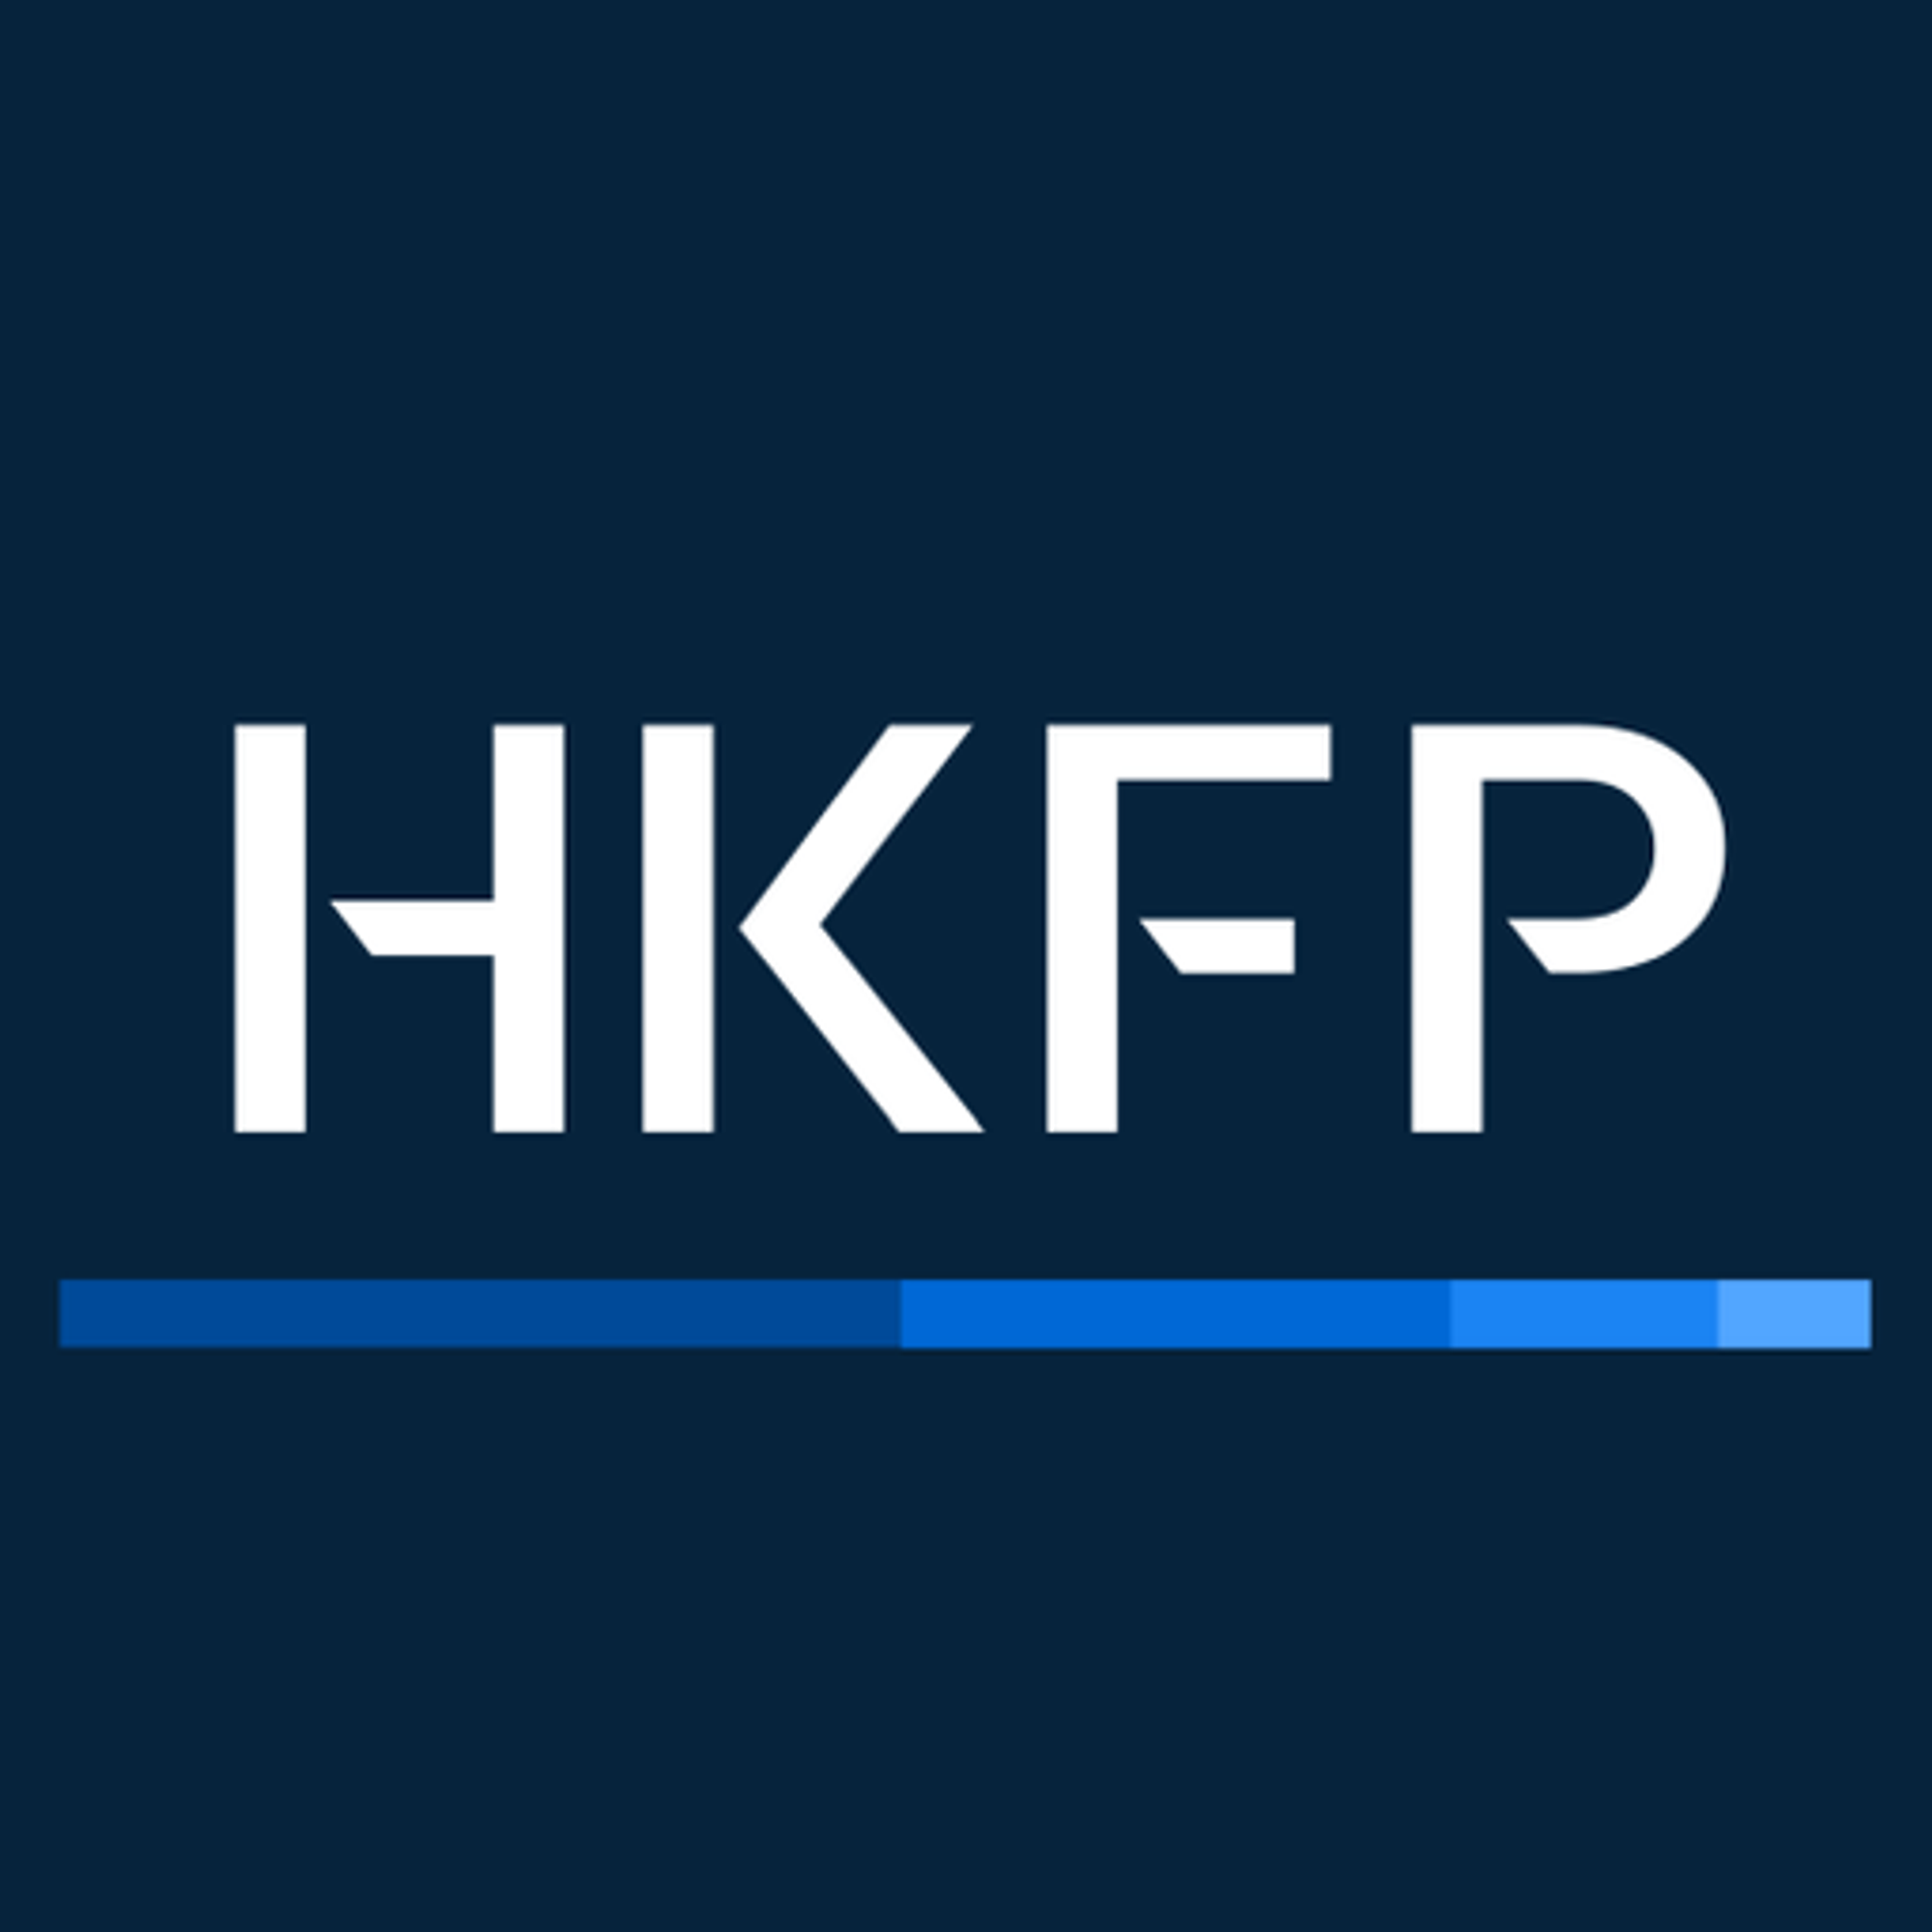 HKFP Guide: How to support Hong Kong's refugees, domestic workers & most vulnerable during Covid-19